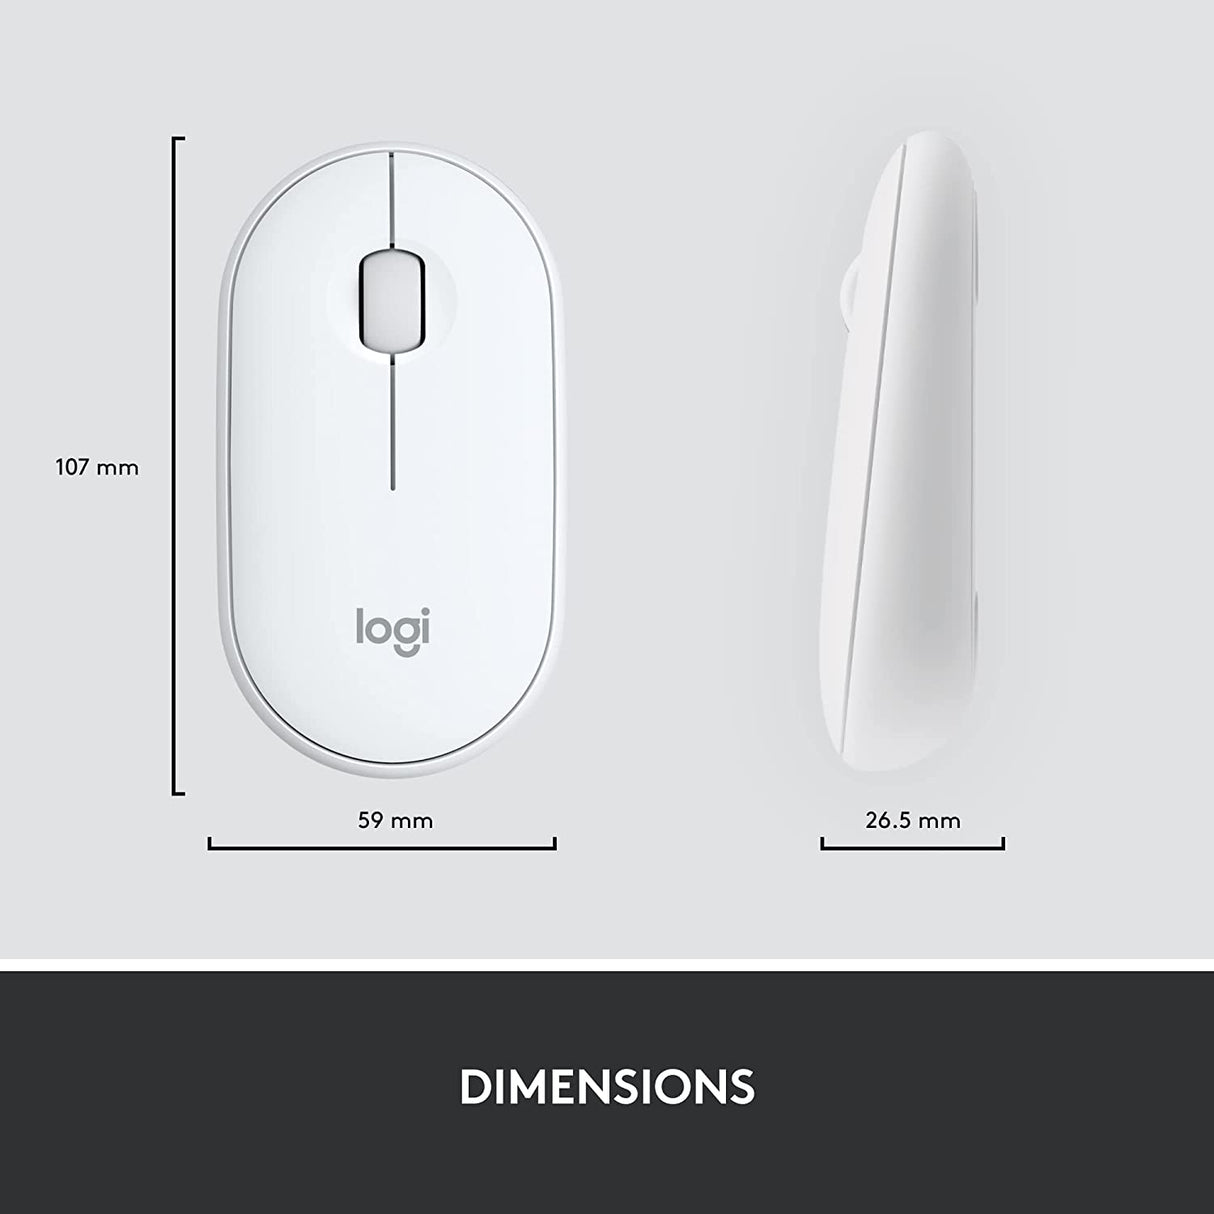 Logitech MK470 Slim Wireless Keyboard and Mouse Combo - Modern Compact Layout, Ultra Quiet, 2.4 GHz USB Receiver, Plug n' Play Connectivity, Compatible with Windows - Off White Off White Combo